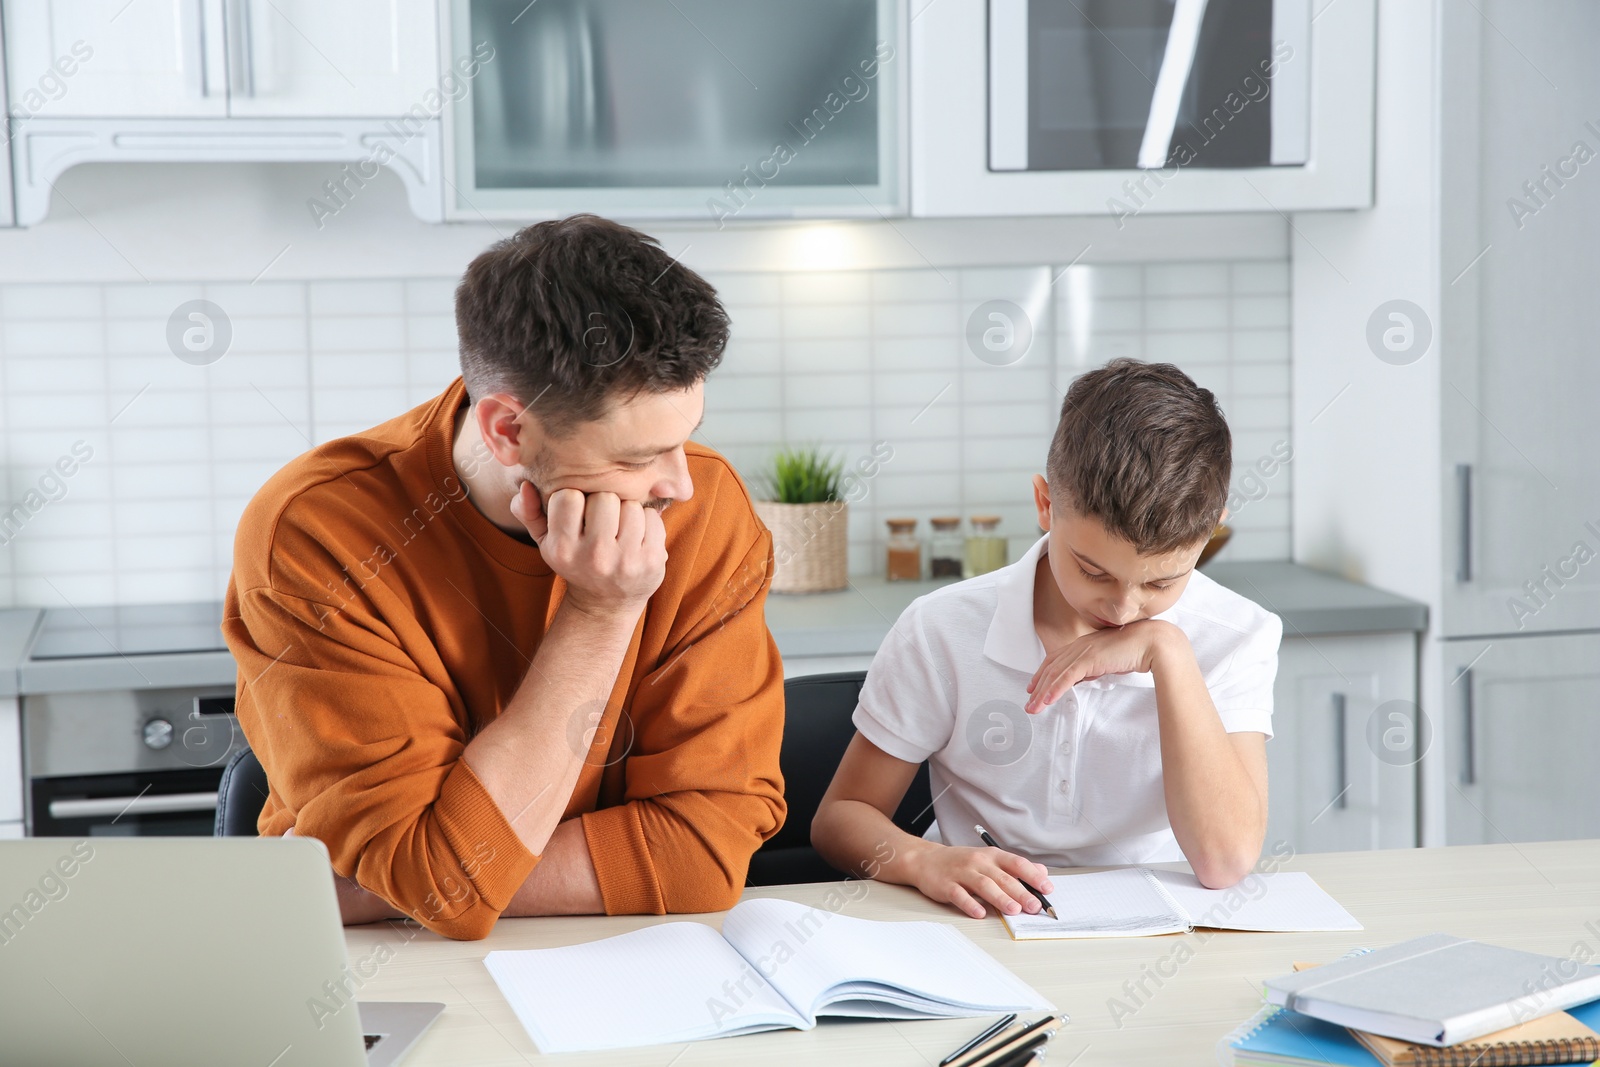 Photo of Dad helping his son with difficult homework assignment in kitchen